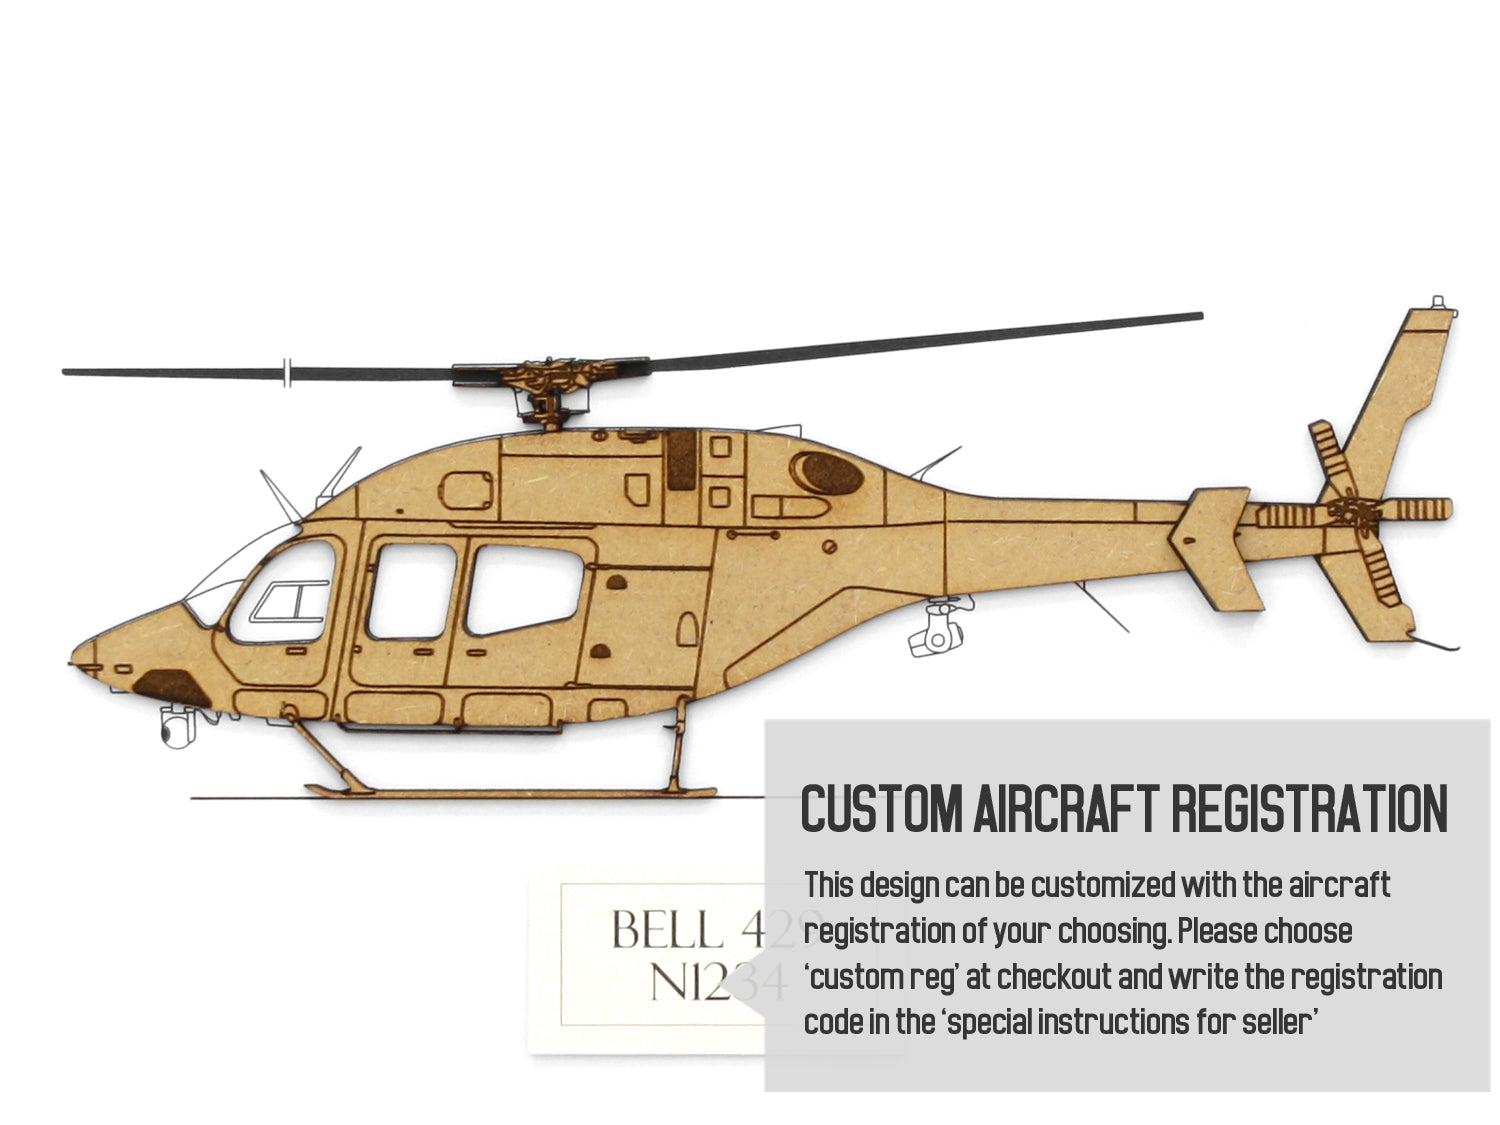 Bell 429 Global Ranger law enforcement helicopter gifts